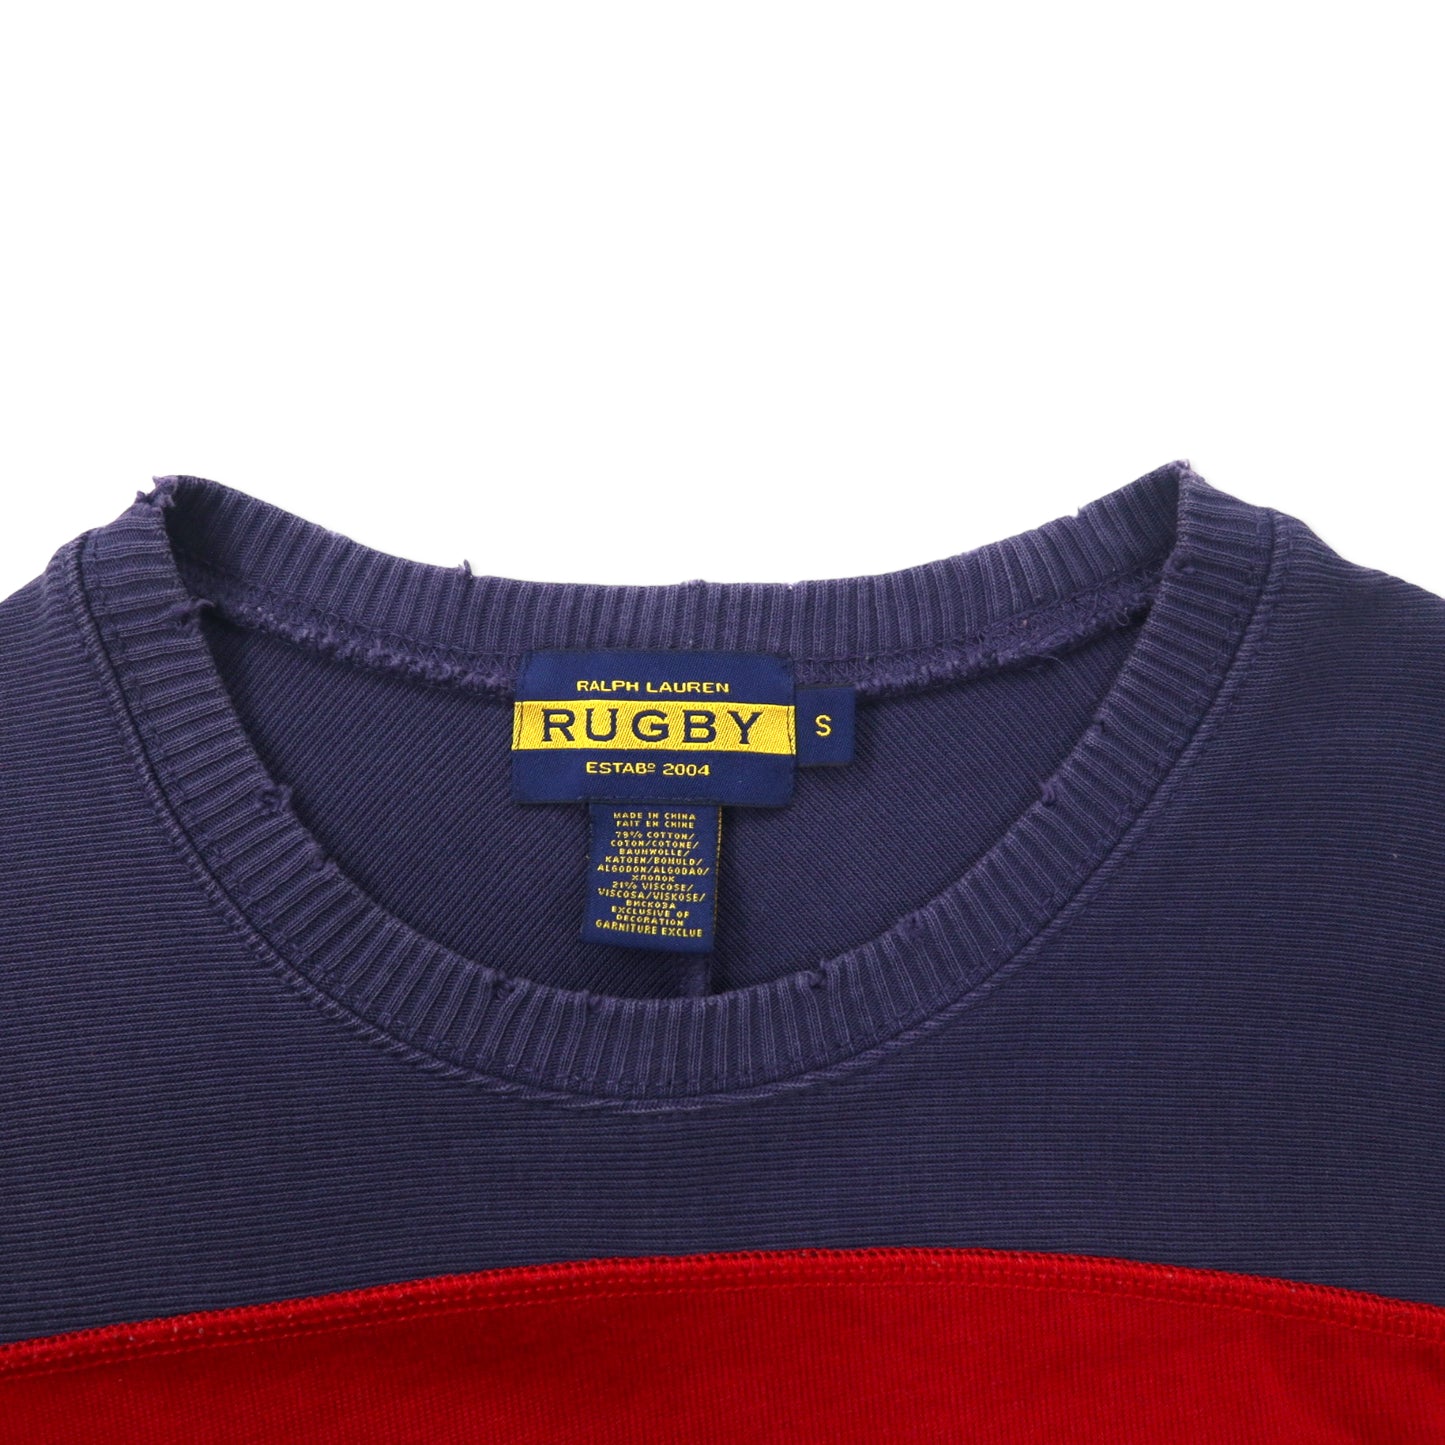 RUGBY RALPH LAUREN Football Shirt RUGBY SHIRT S Red Cotton Numbers 